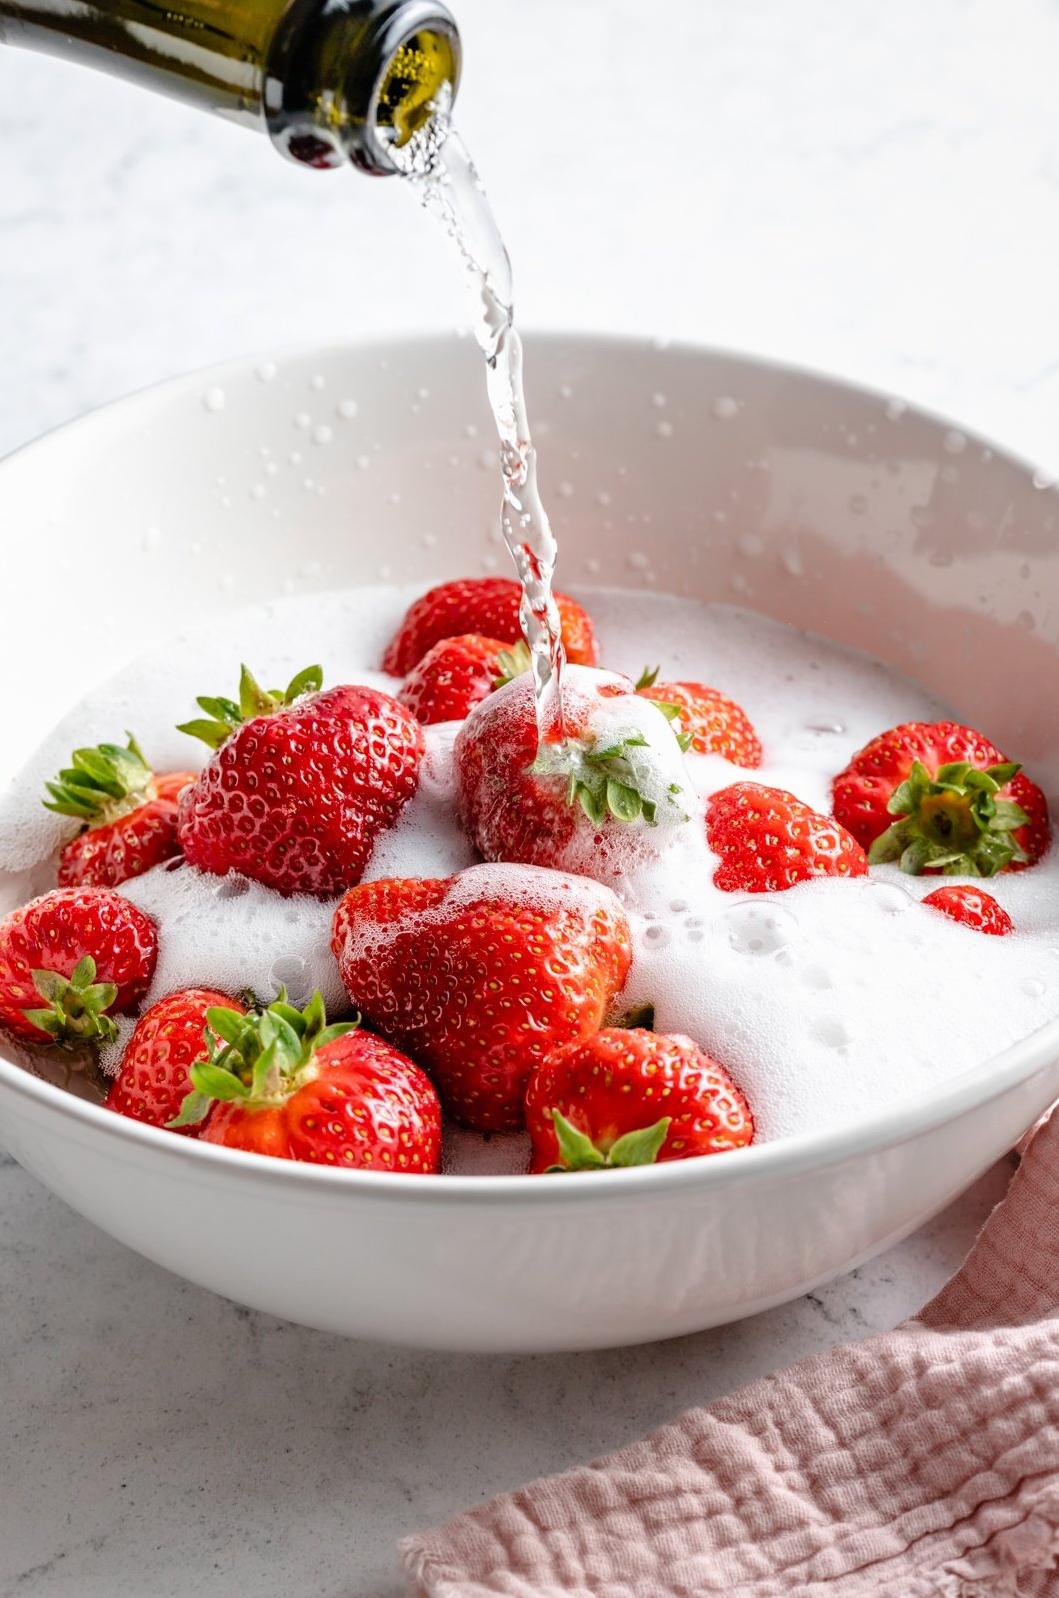  Pour on the Pink: fresh strawberries take a dip in our favorite wine